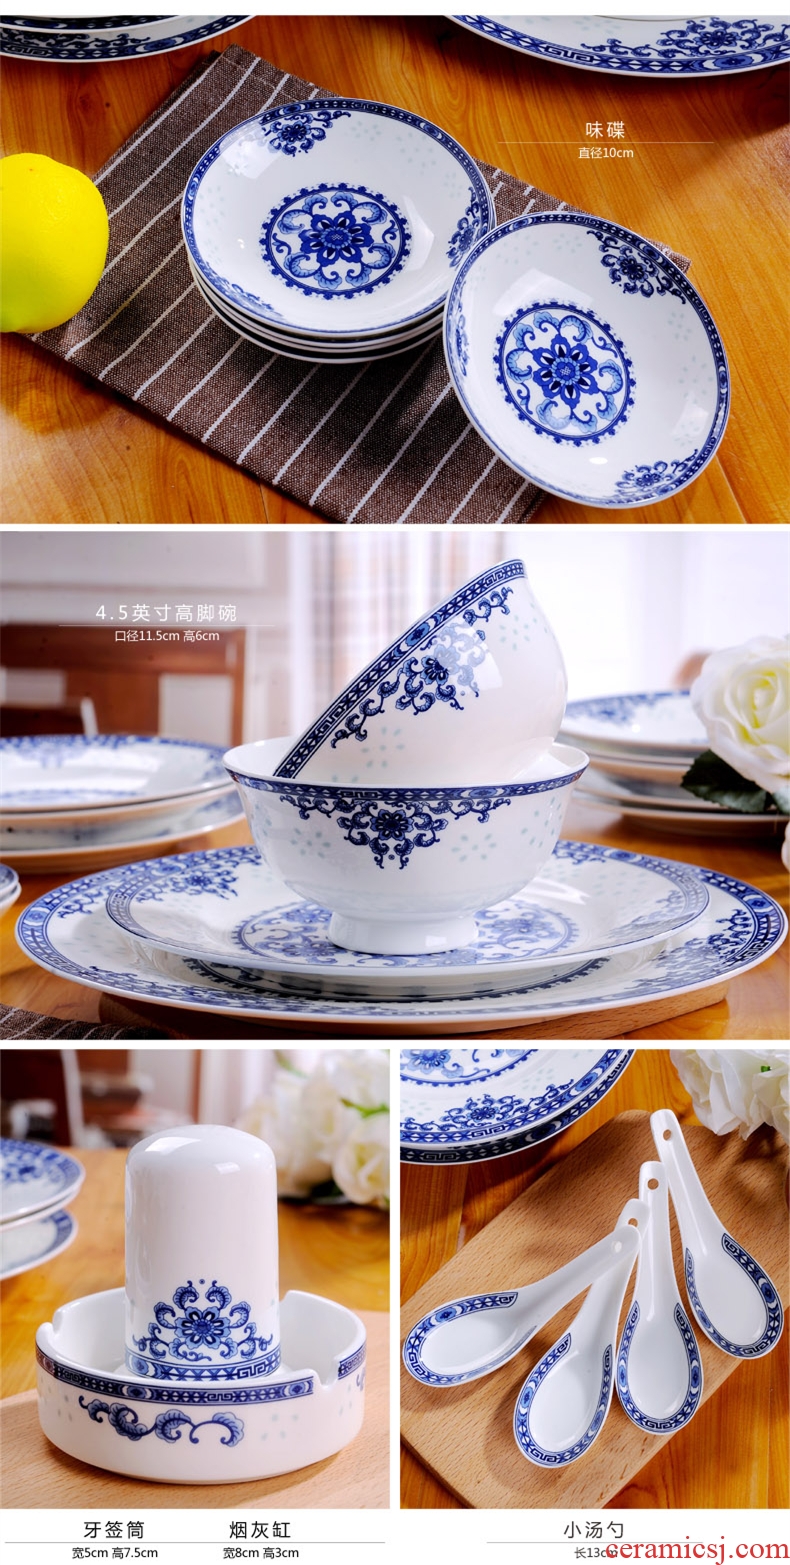 The dishes suit household of Chinese style jingdezhen fine white porcelain tableware high-grade porcelain gifts glair blue and white porcelain plate